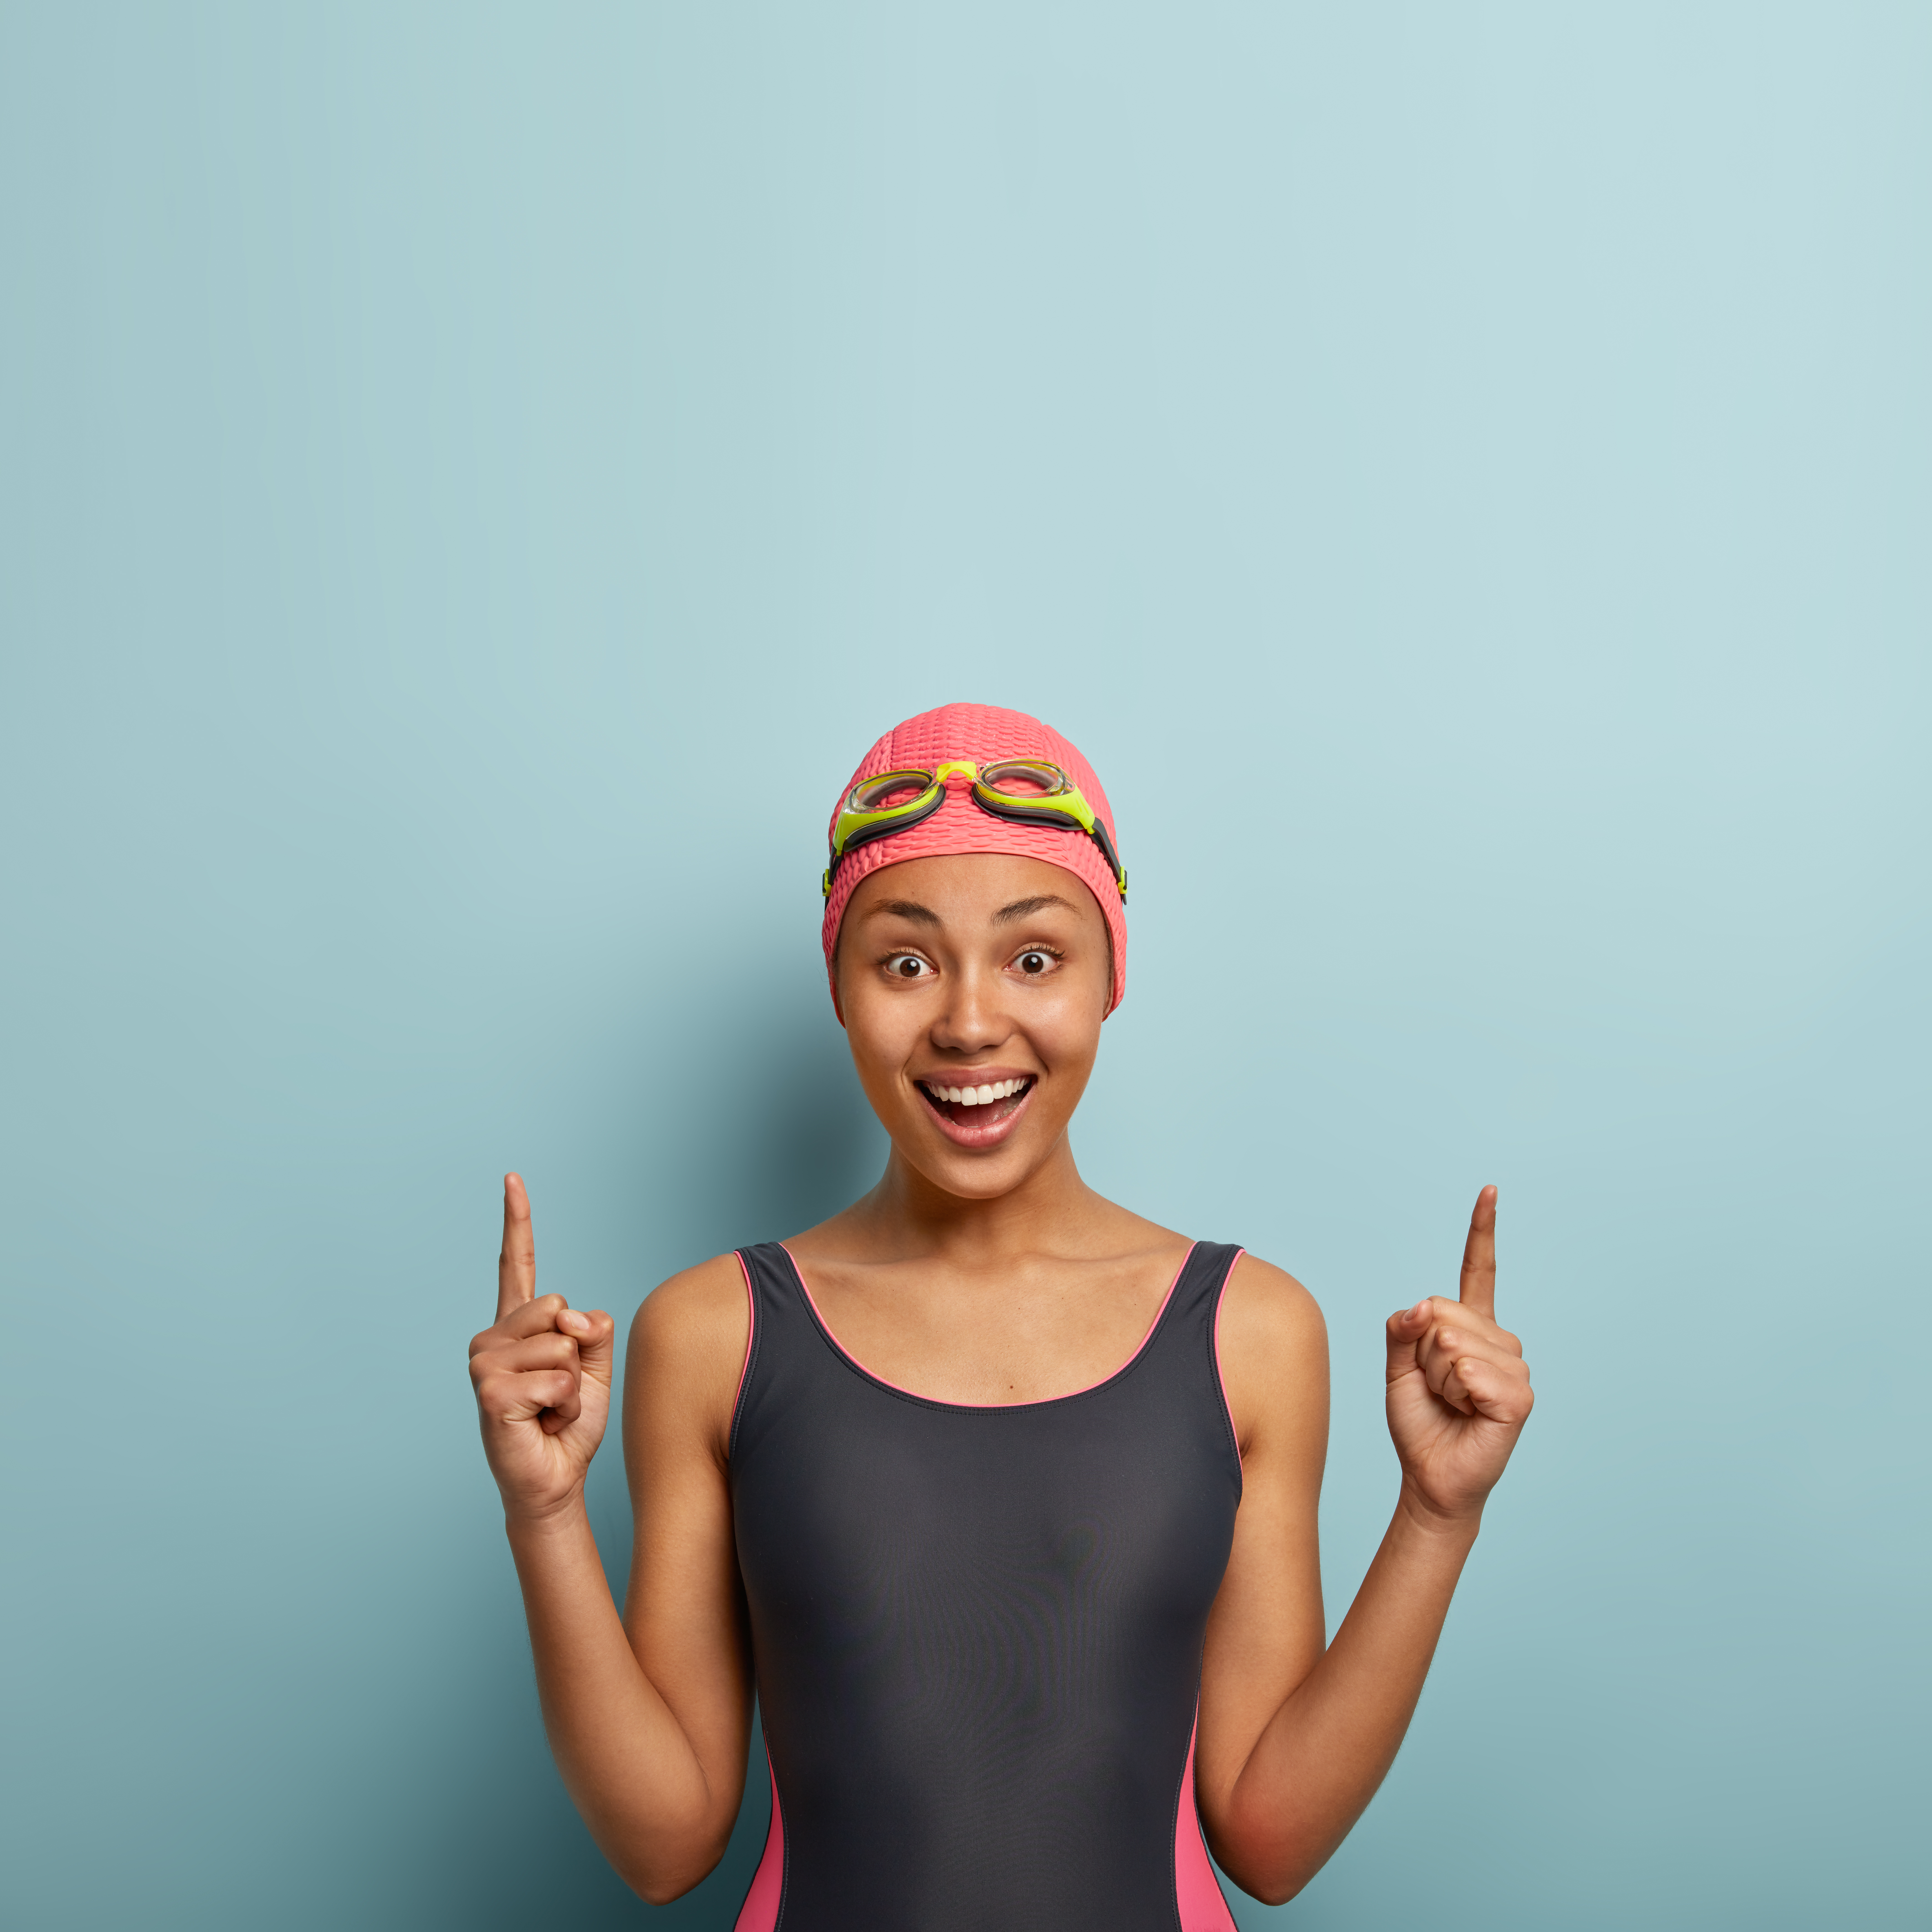 positive-woman-enjoys-water-sport-dressed-black-swimsuit-swimming-hat-goggles-points-free-space-advertises-accessories-diving-prepares-contest-sport-promotion-concept.jpg